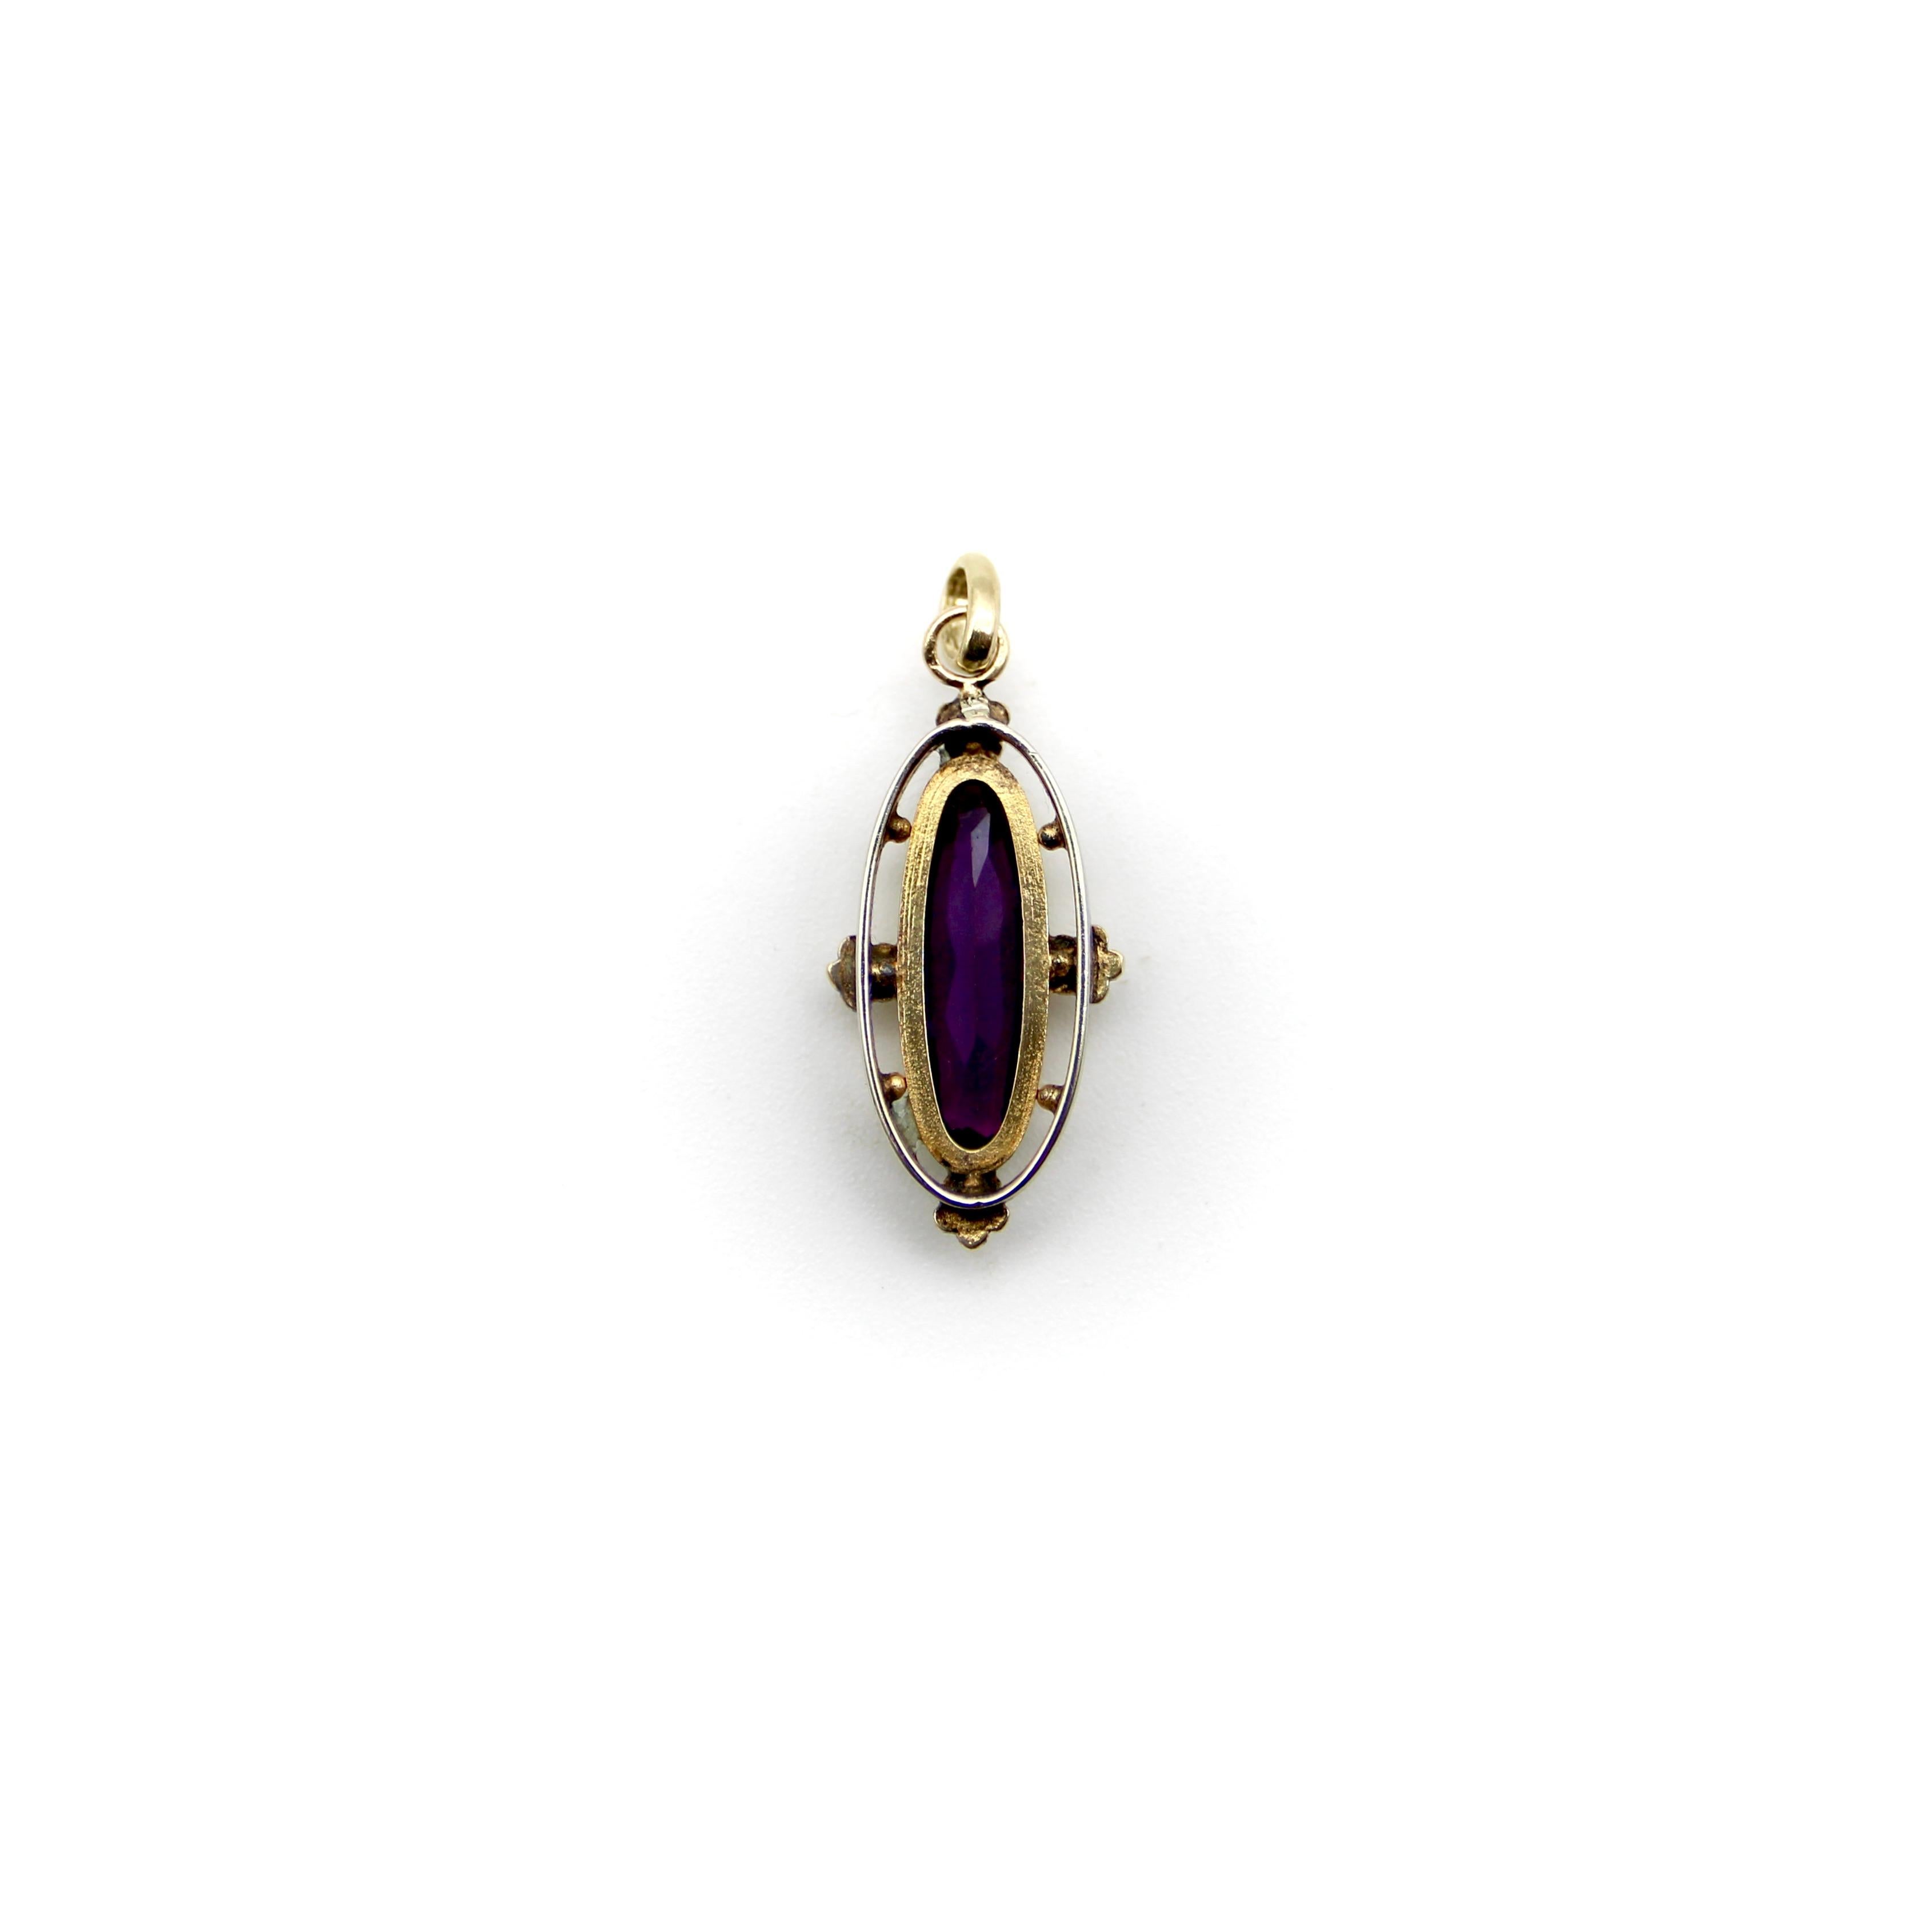 Oval Cut Victorian Amethyst 14K Gold and Silver Pendent 